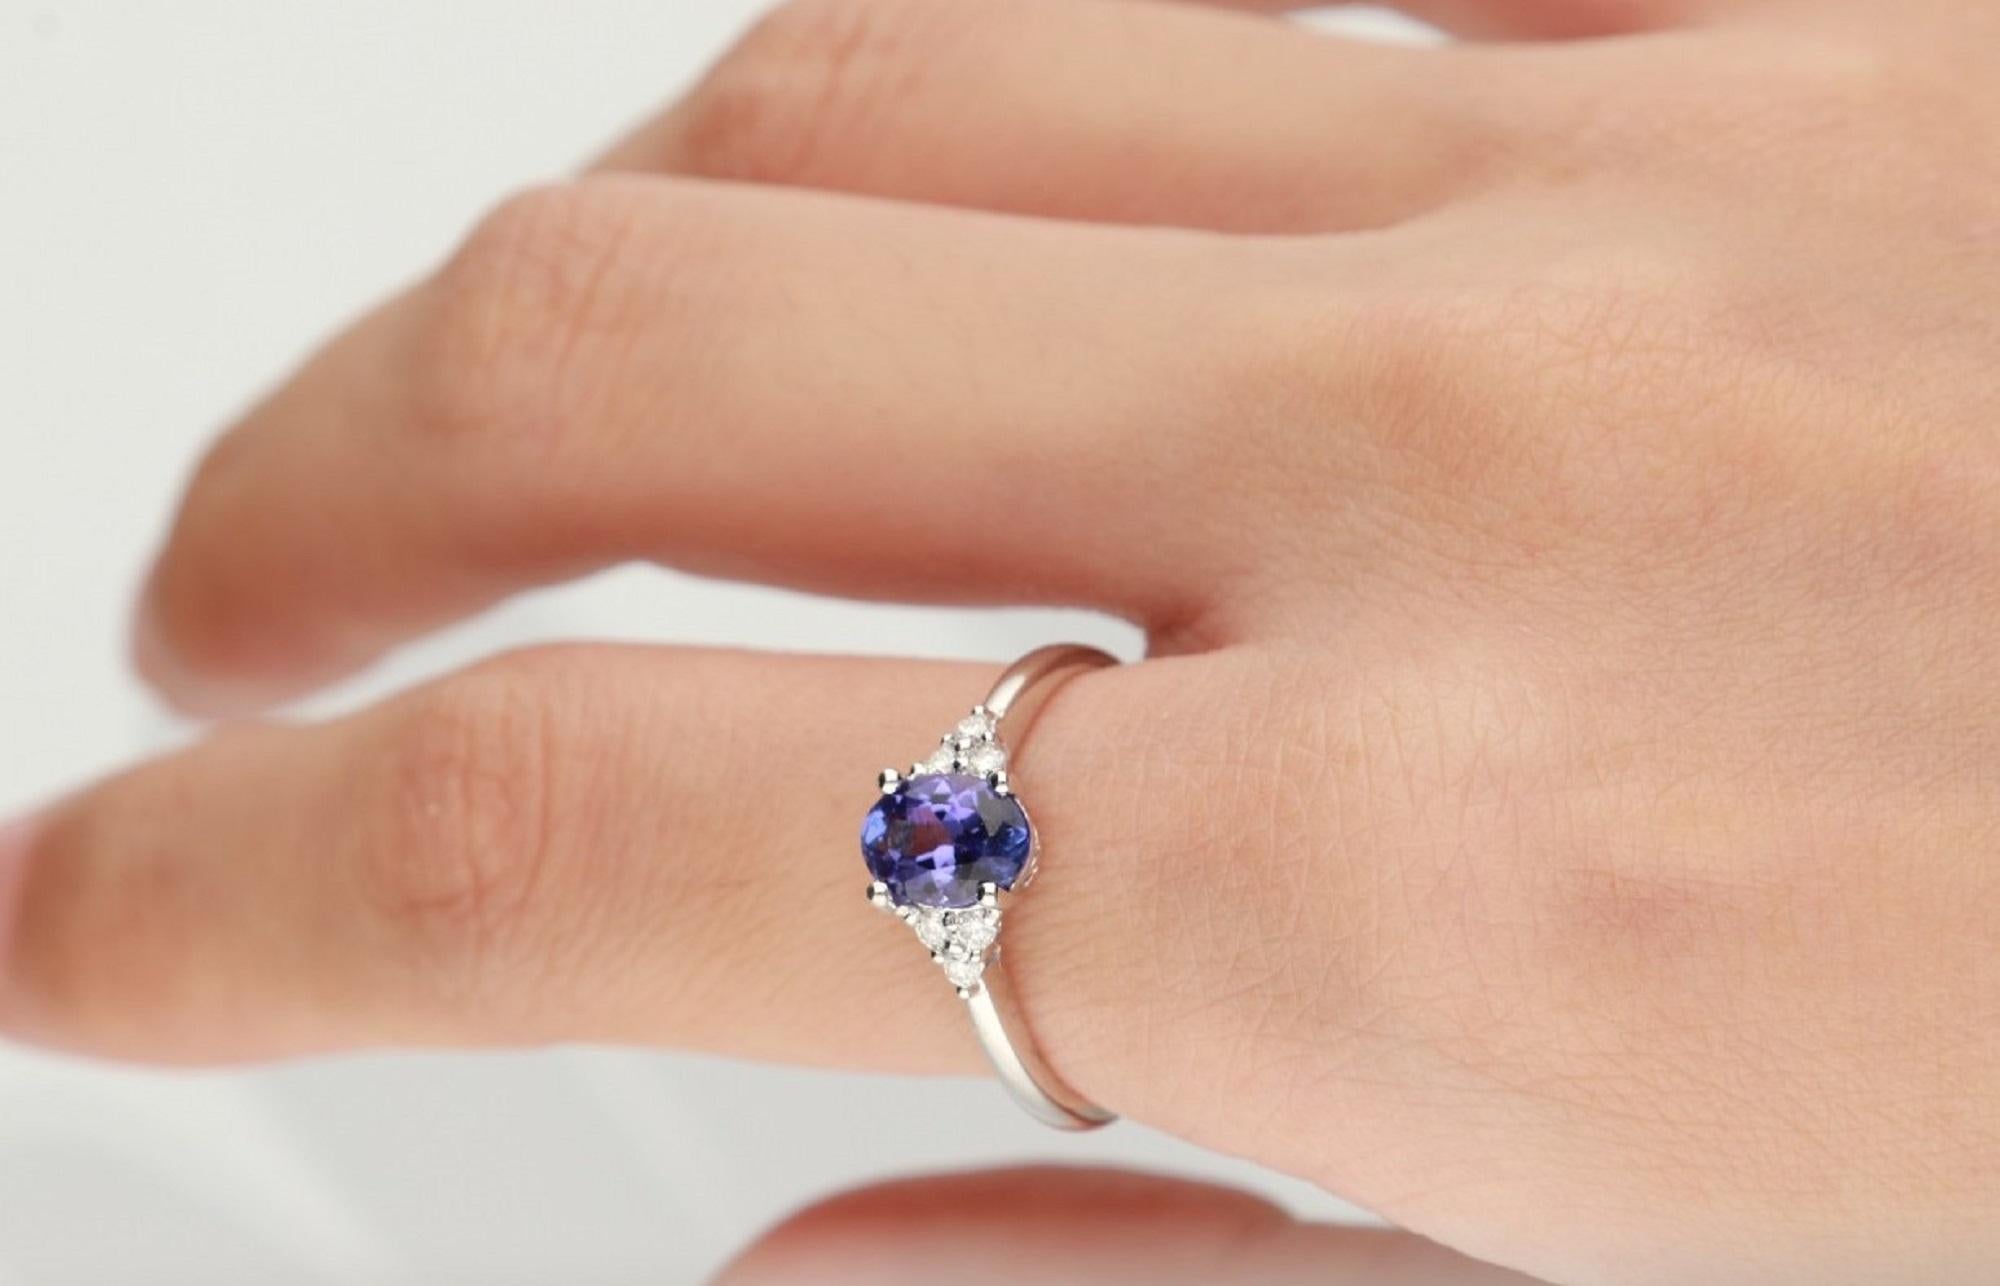 Stunning, timeless and classy eternity Unique Ring. Decorate yourself in luxury with this Gin & Grace Ring. The 14k White Gold jewelry boasts Oval-Cut Prong Setting Genuine Tanzanite (1 pcs) 1.02 Carat, along with Natural Round cut white Diamond